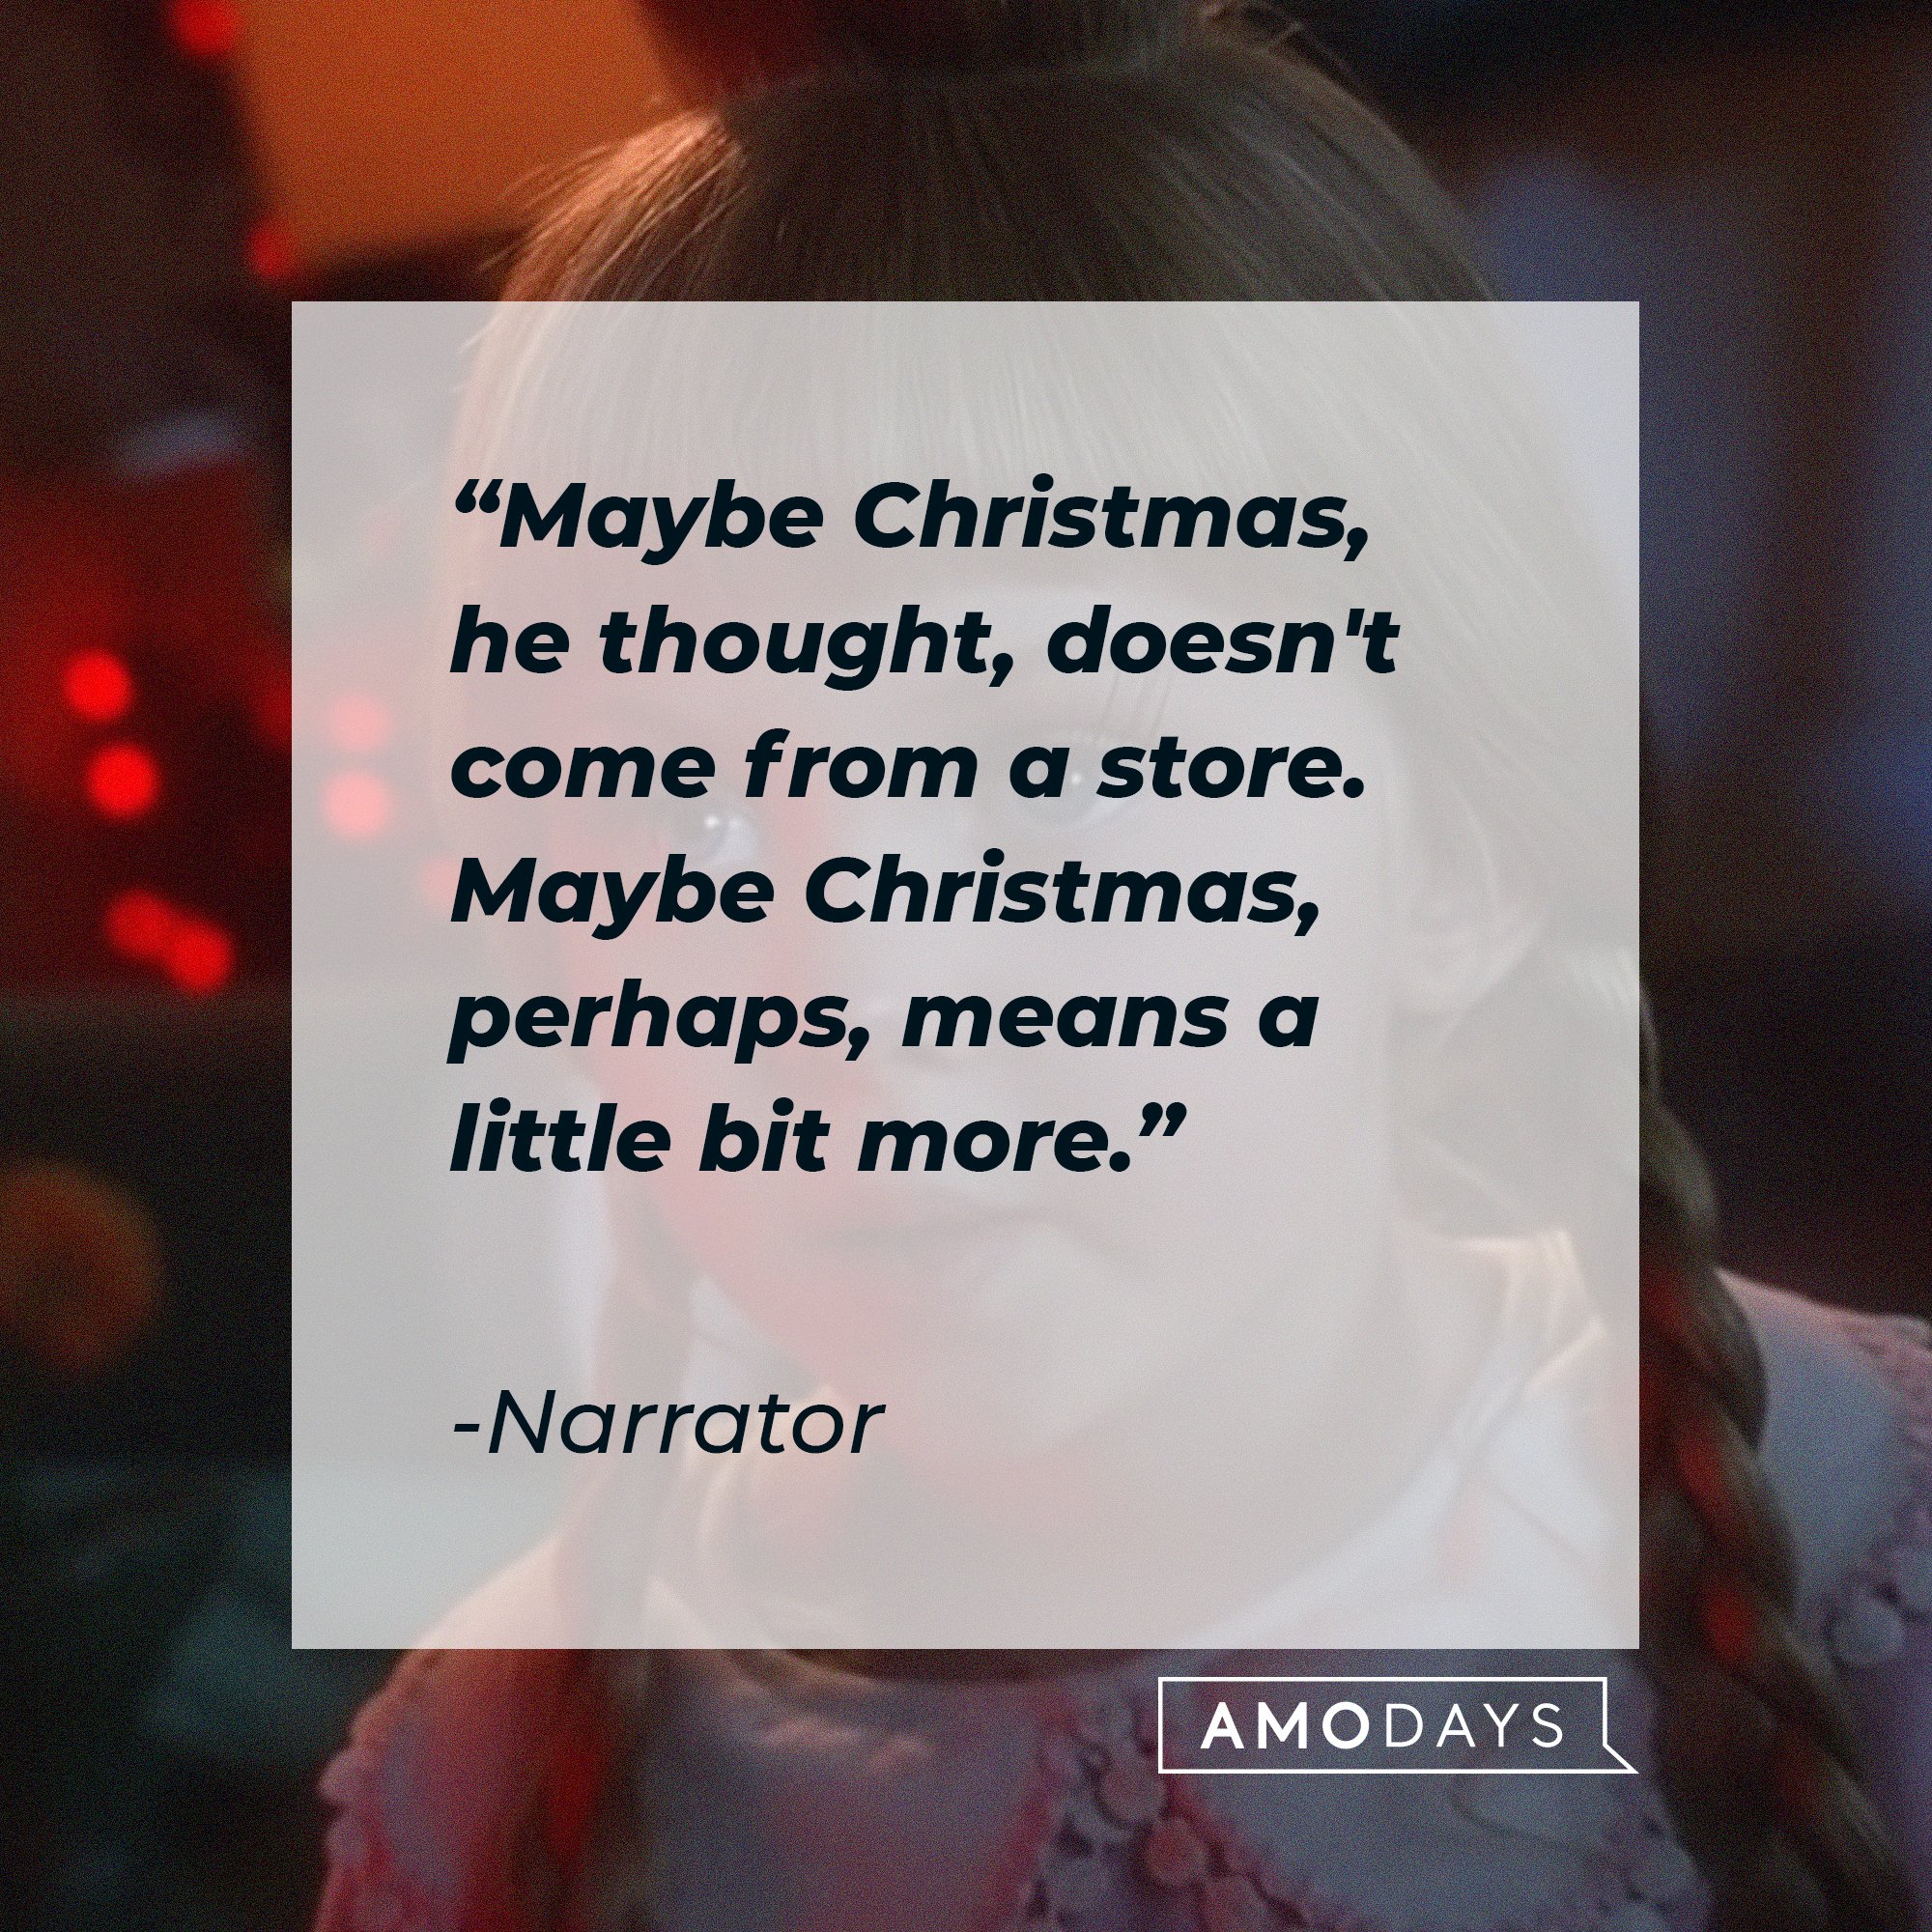 Narrator's quote: "Maybe Christmas, he thought, doesn't come from a store. Maybe Christmas, perhaps, means a little bit more." | Image: AmoDays